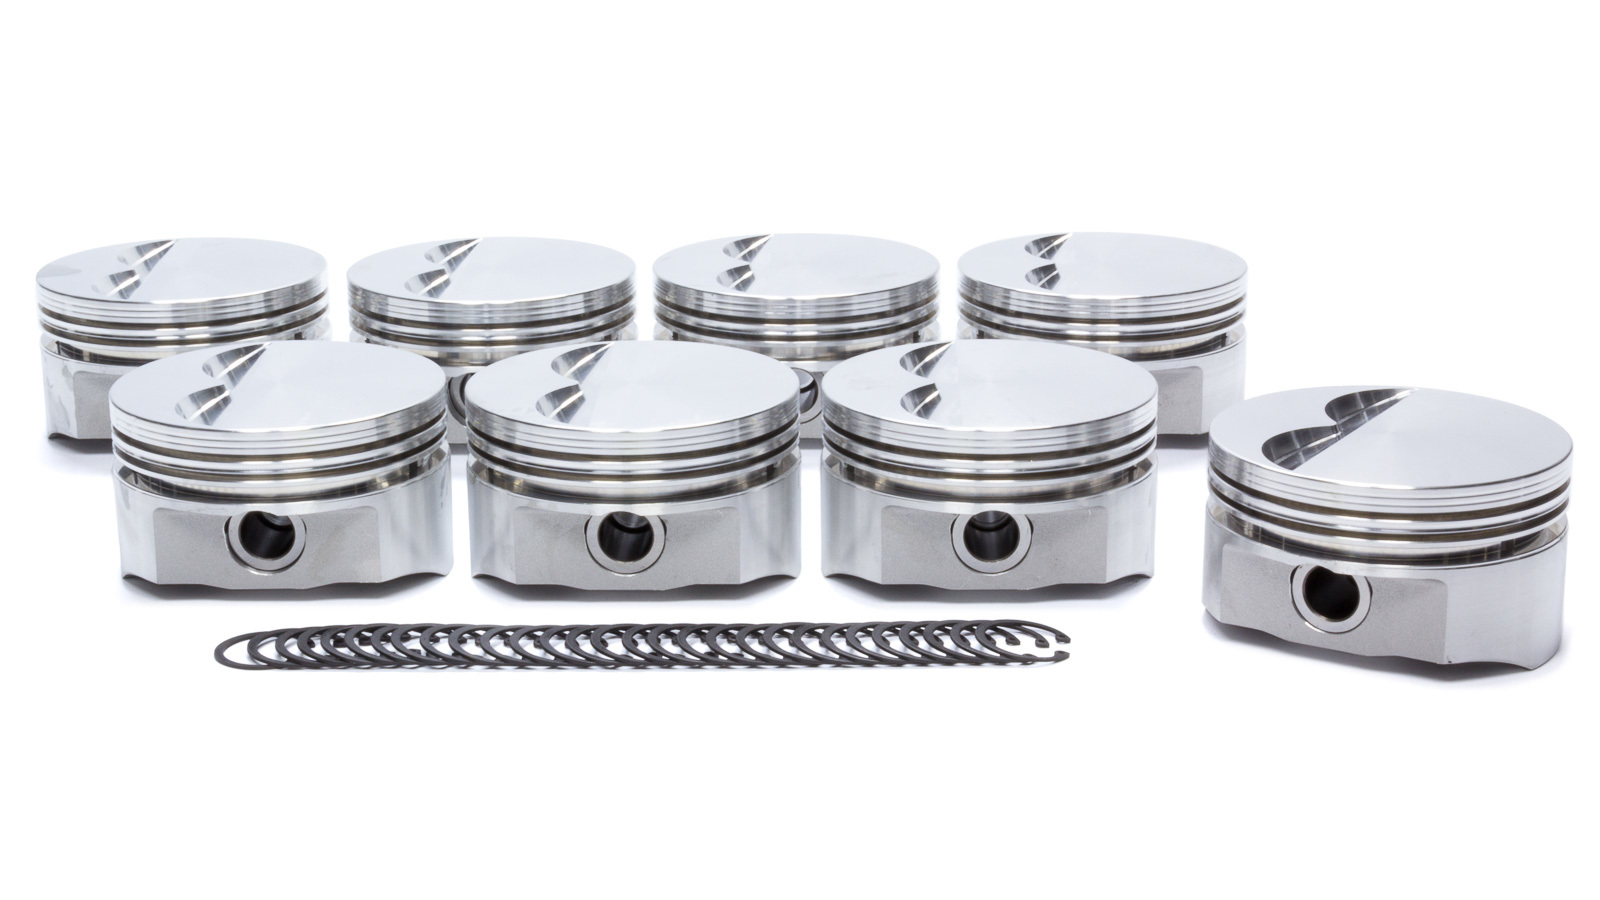 DSS Racing 8710-4030 Piston, E Series, Forged, 4.030 in Bore, 5/64 x 5/64 x 3/16 in Ring Grooves, Minus 5.00 cc, Small Block Chevy, Set of 8